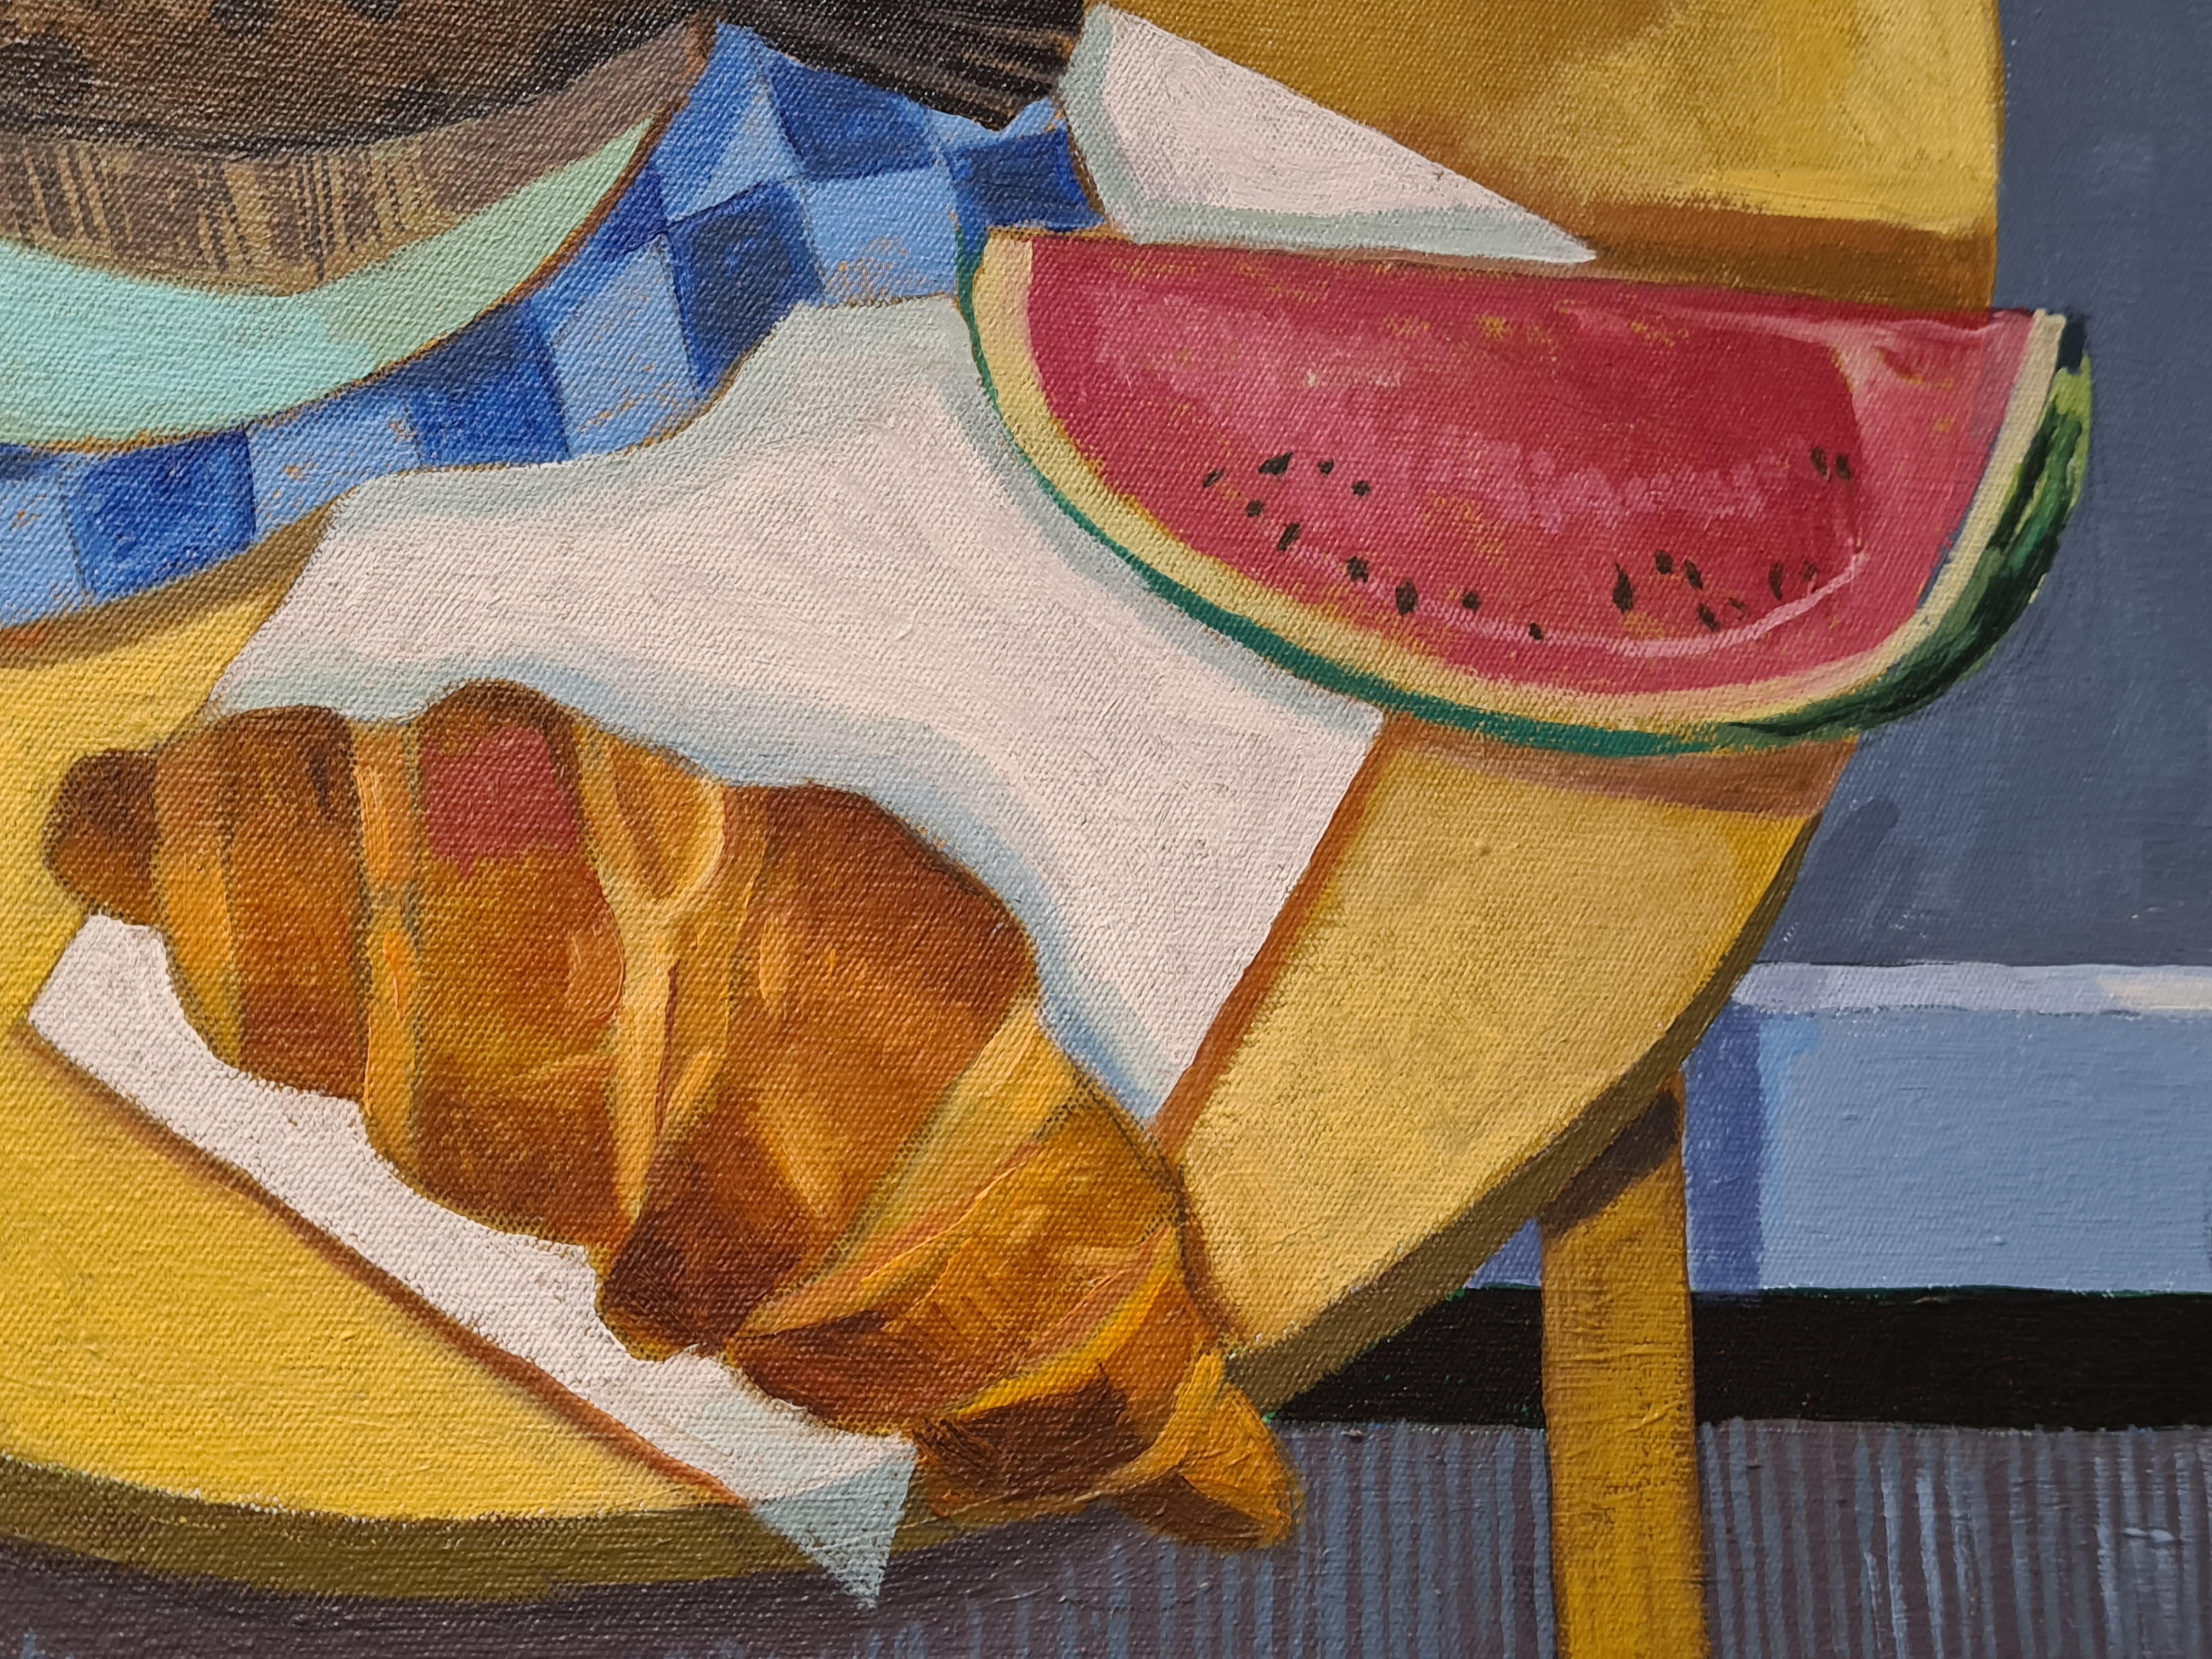 Breakfast Tablescape with Plaice. Oil on Canvas. - Surrealist Painting by Frank Docherty